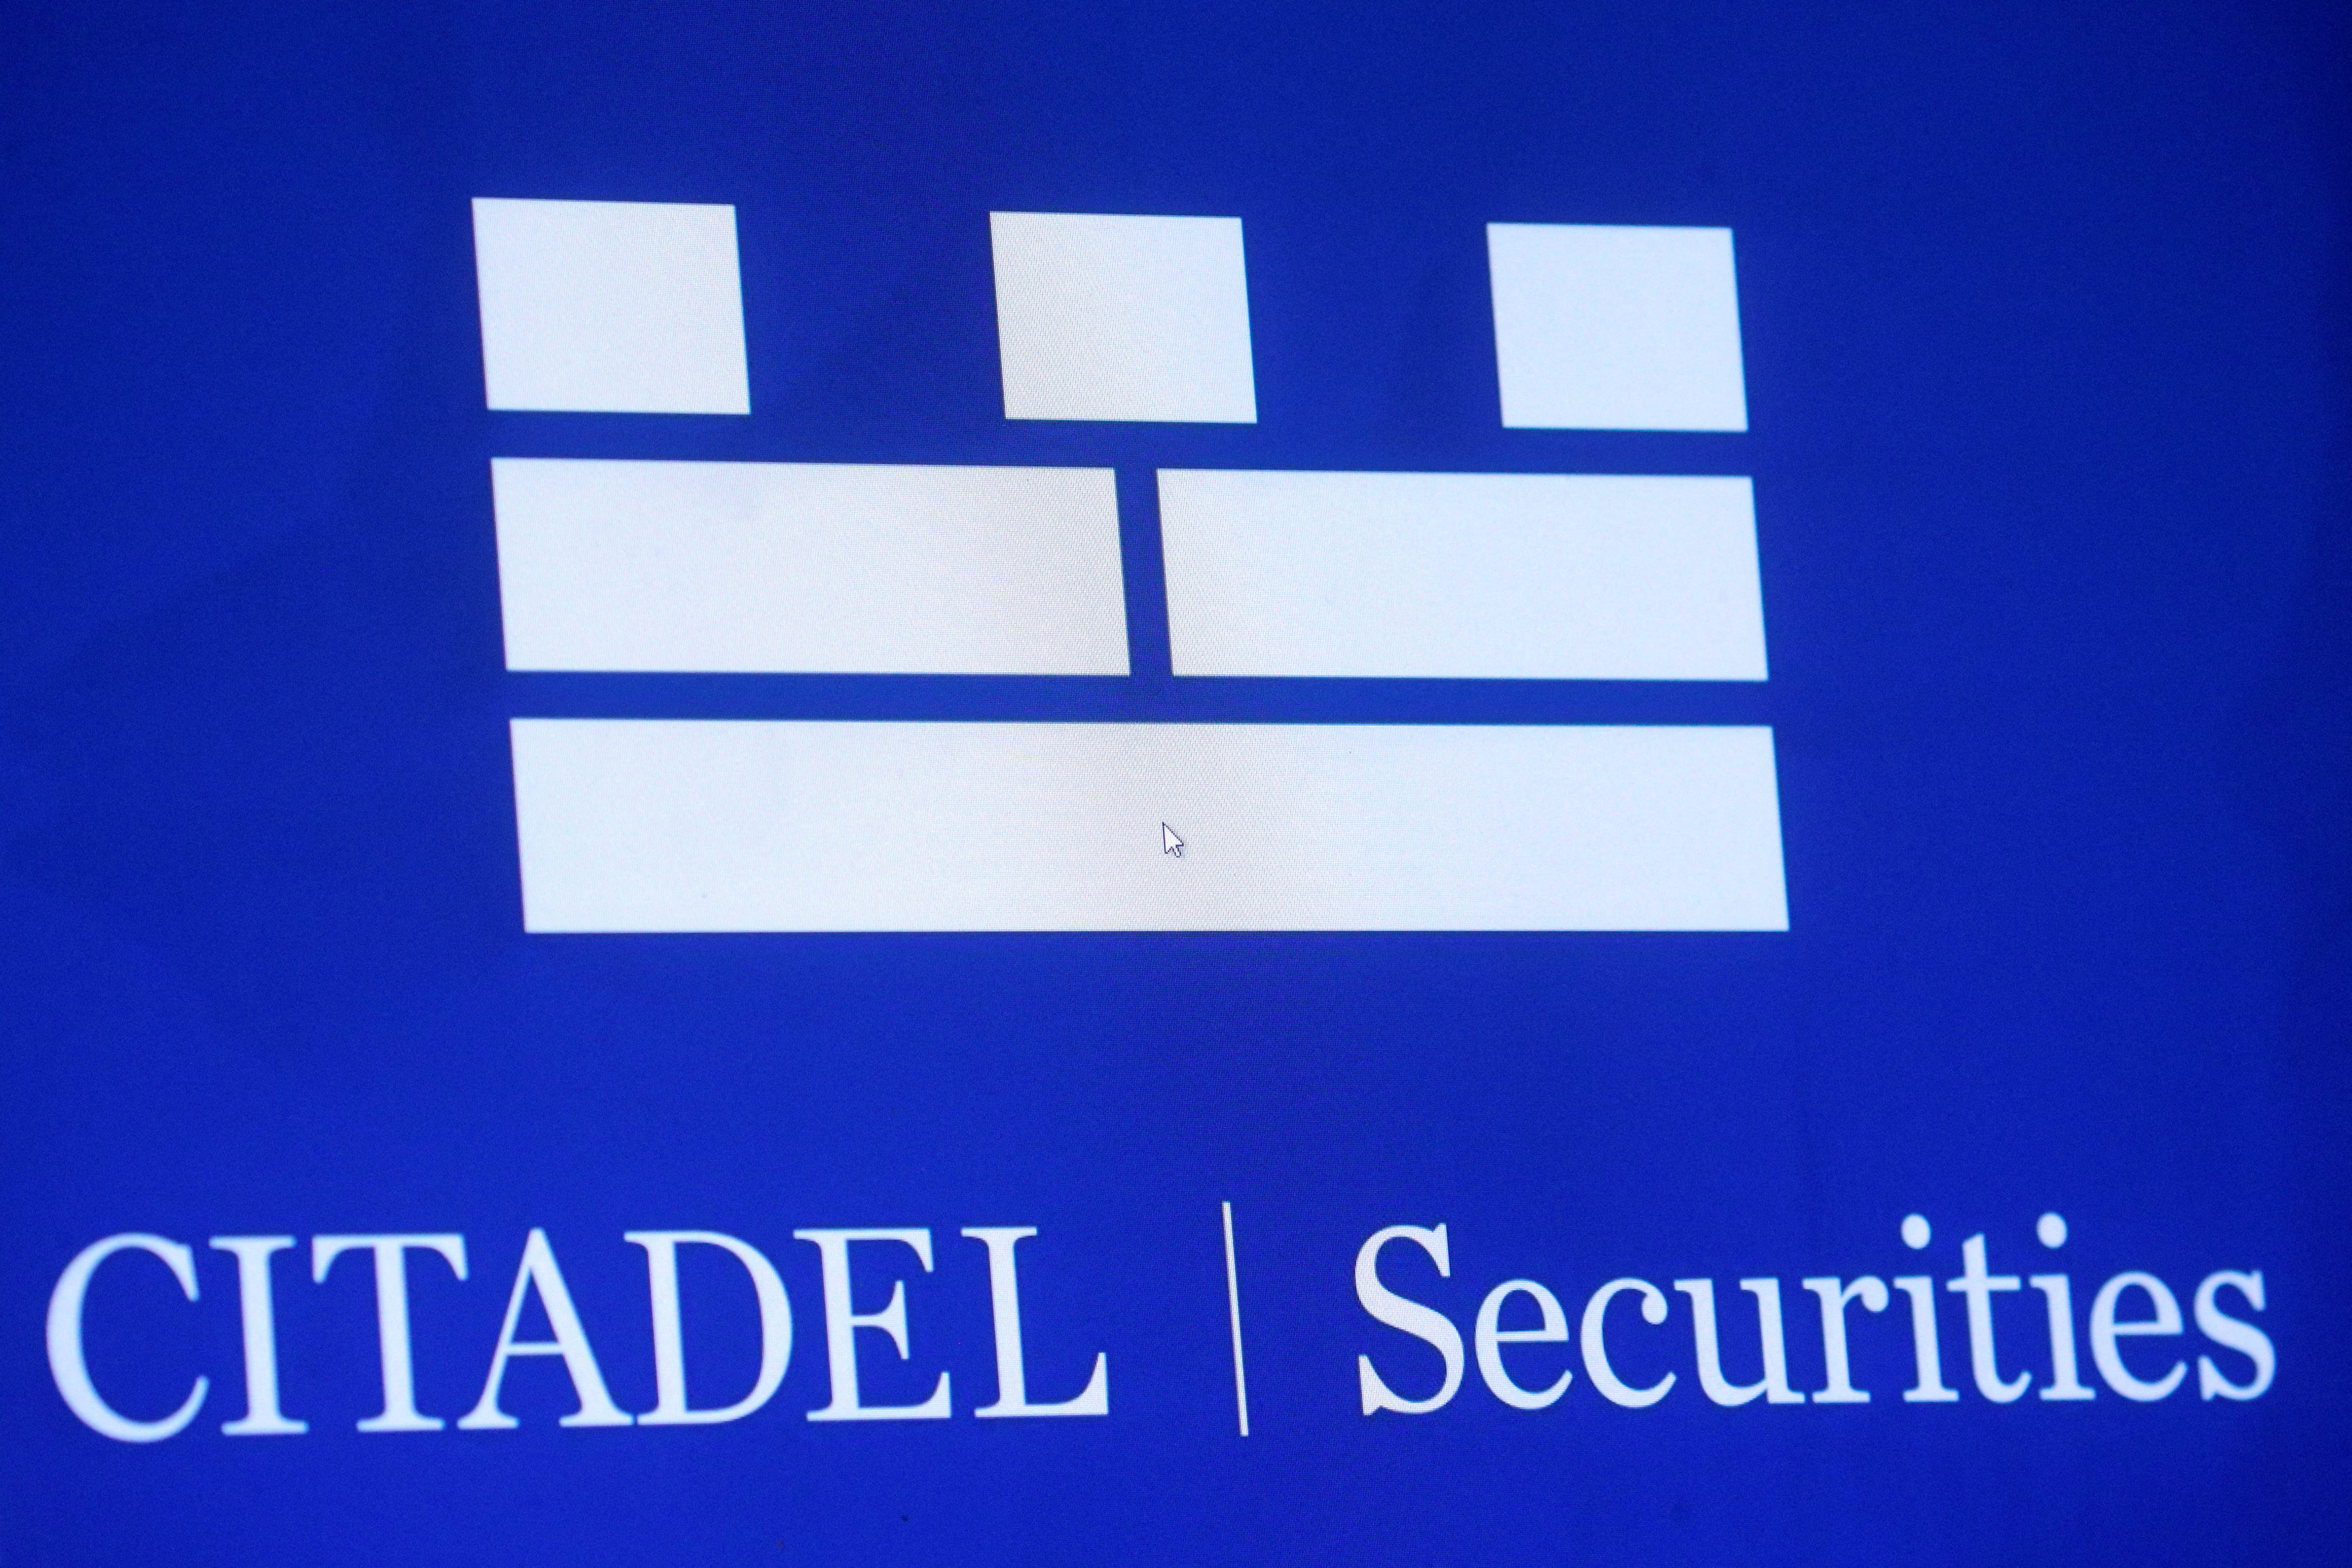 The Citadel Securities logo is displayed on a screen on the floor of the NYSE in New York